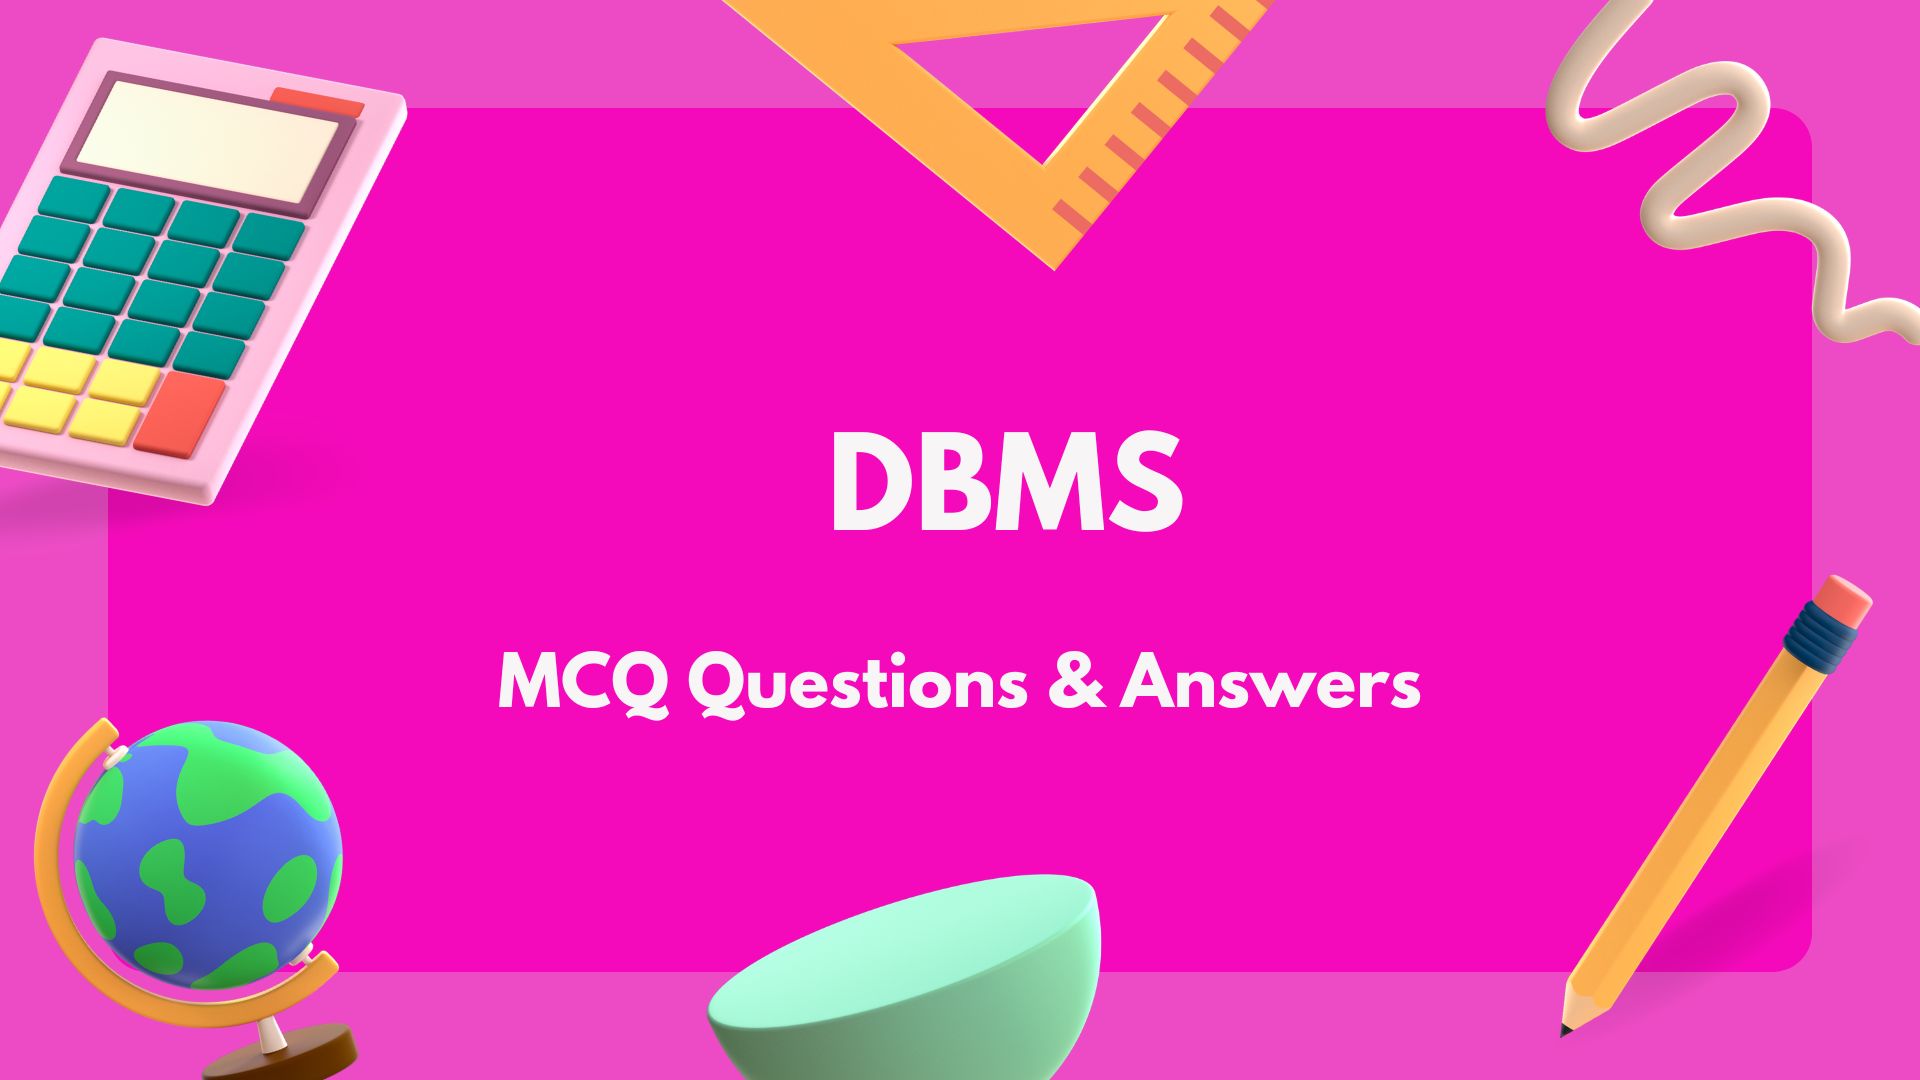 DBMS MCQ Questions & Answers